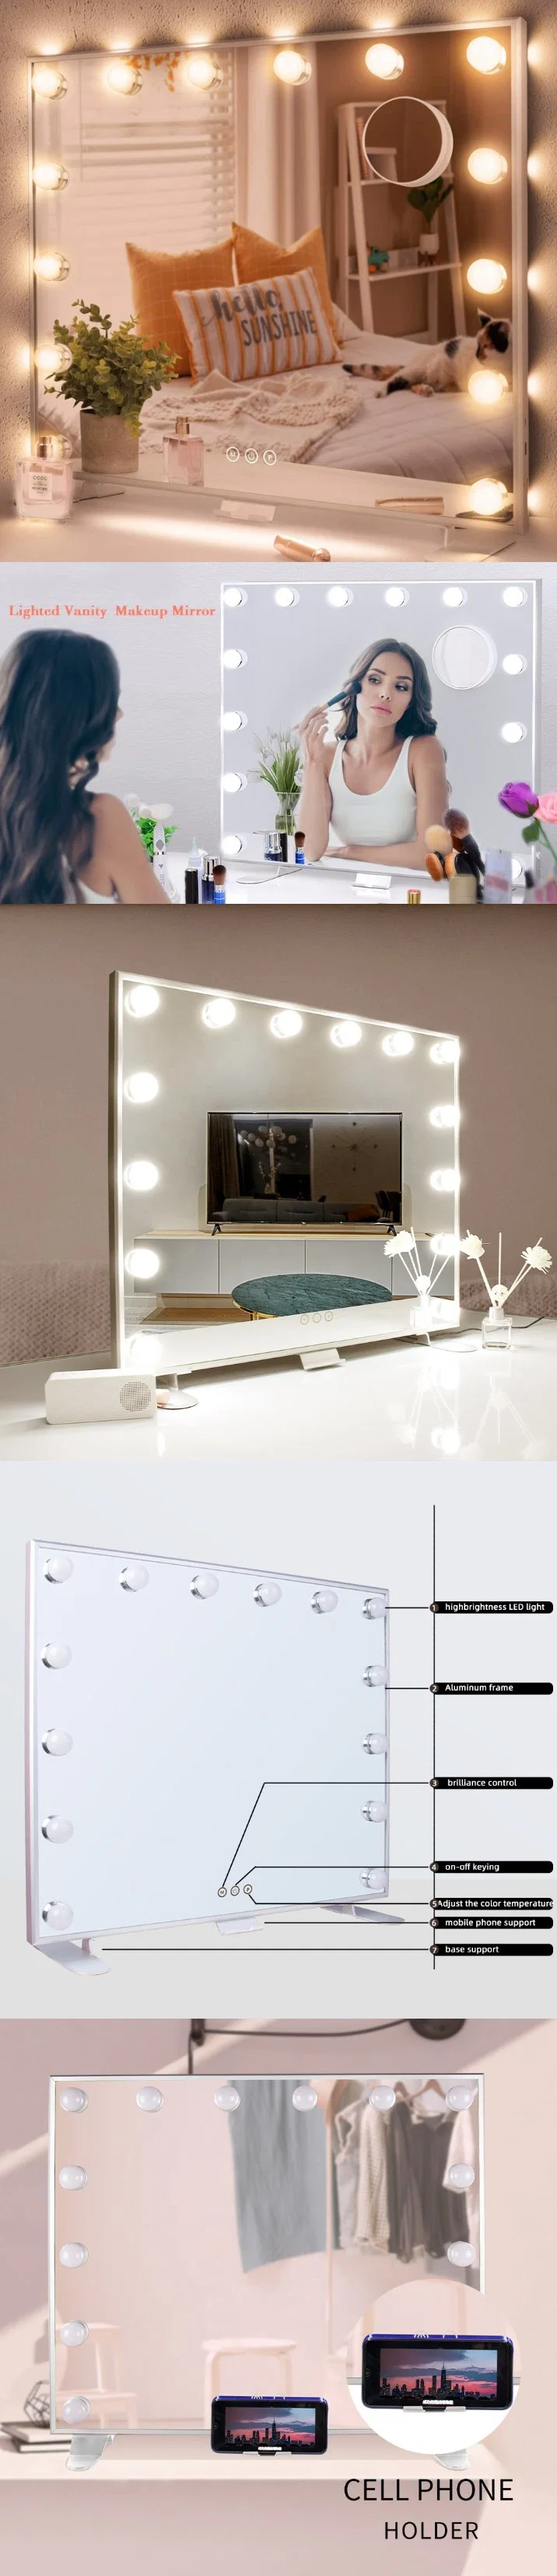 Hollywood Vanity Mirror 3 Color Lighting mirror for Dressing Room Tabletop or Wall-Mounted Touch Sensor Large mirror